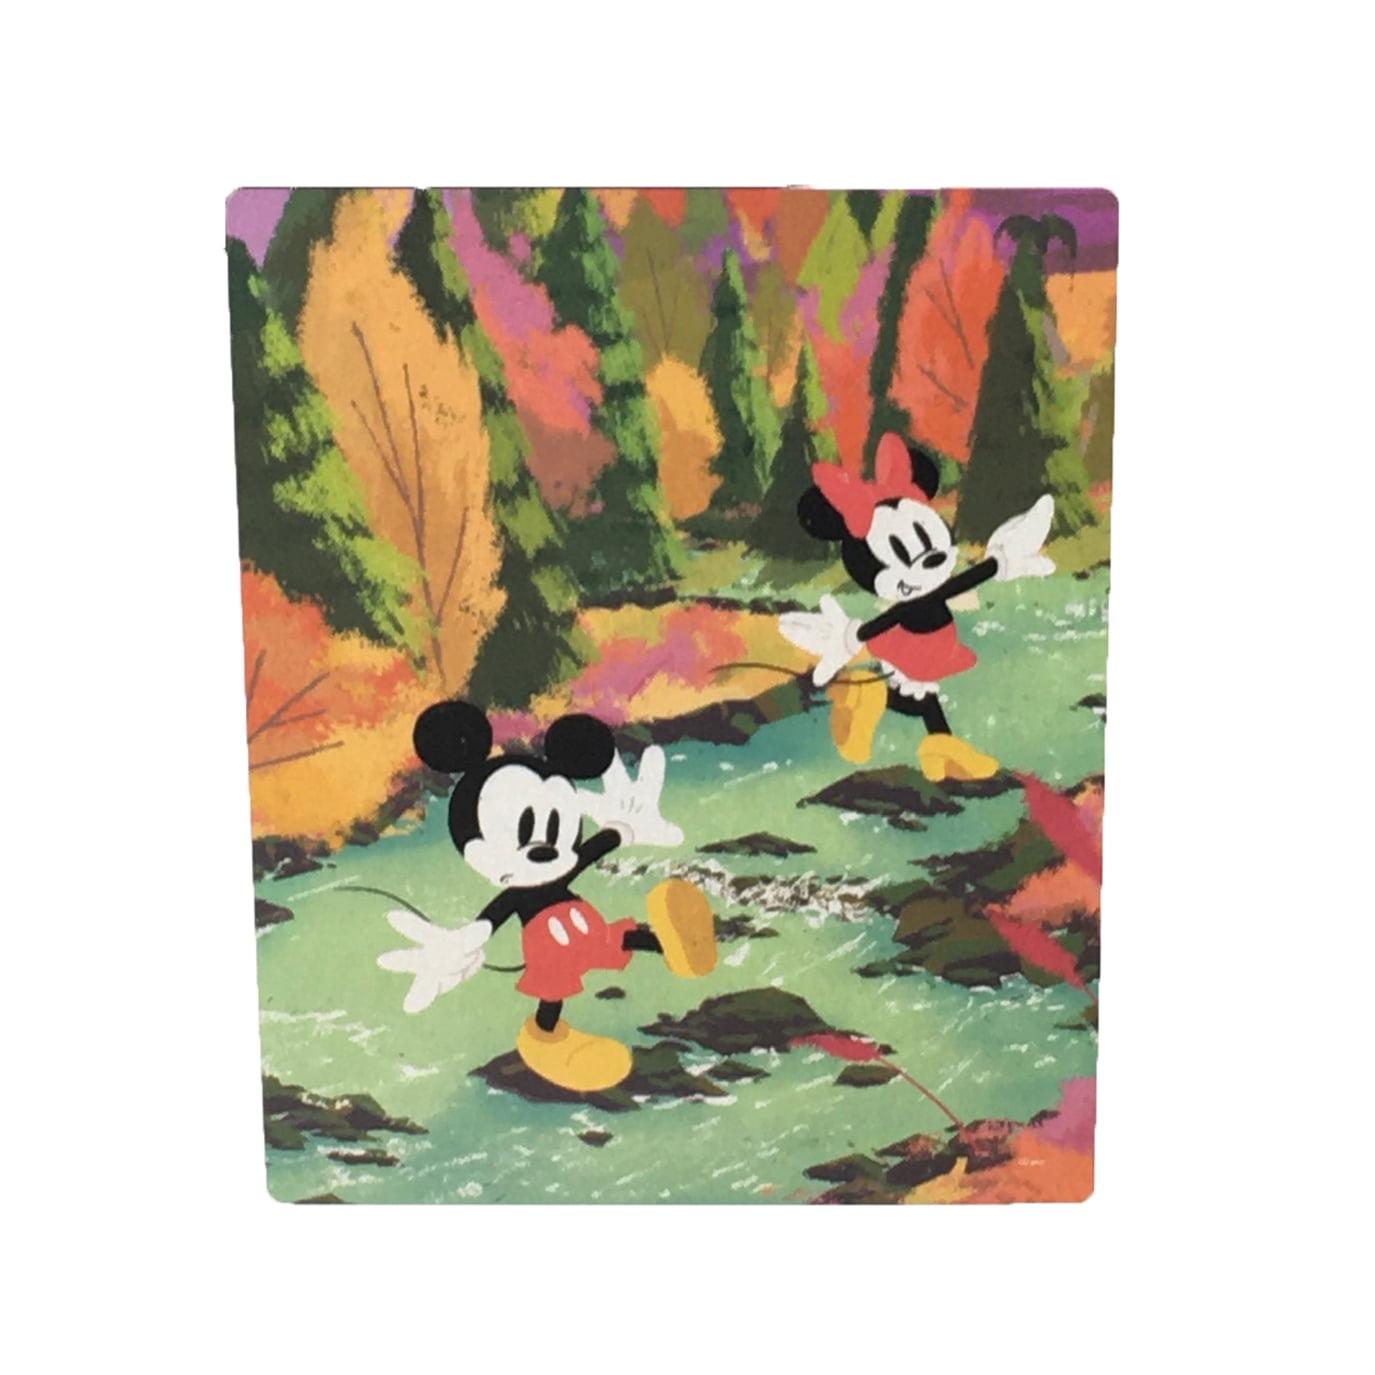 Details about   Cardinal Lot of 2 Disney 500 Pieces Jigsaw Puzzles Minnie Mouse 11 x 14 inch 